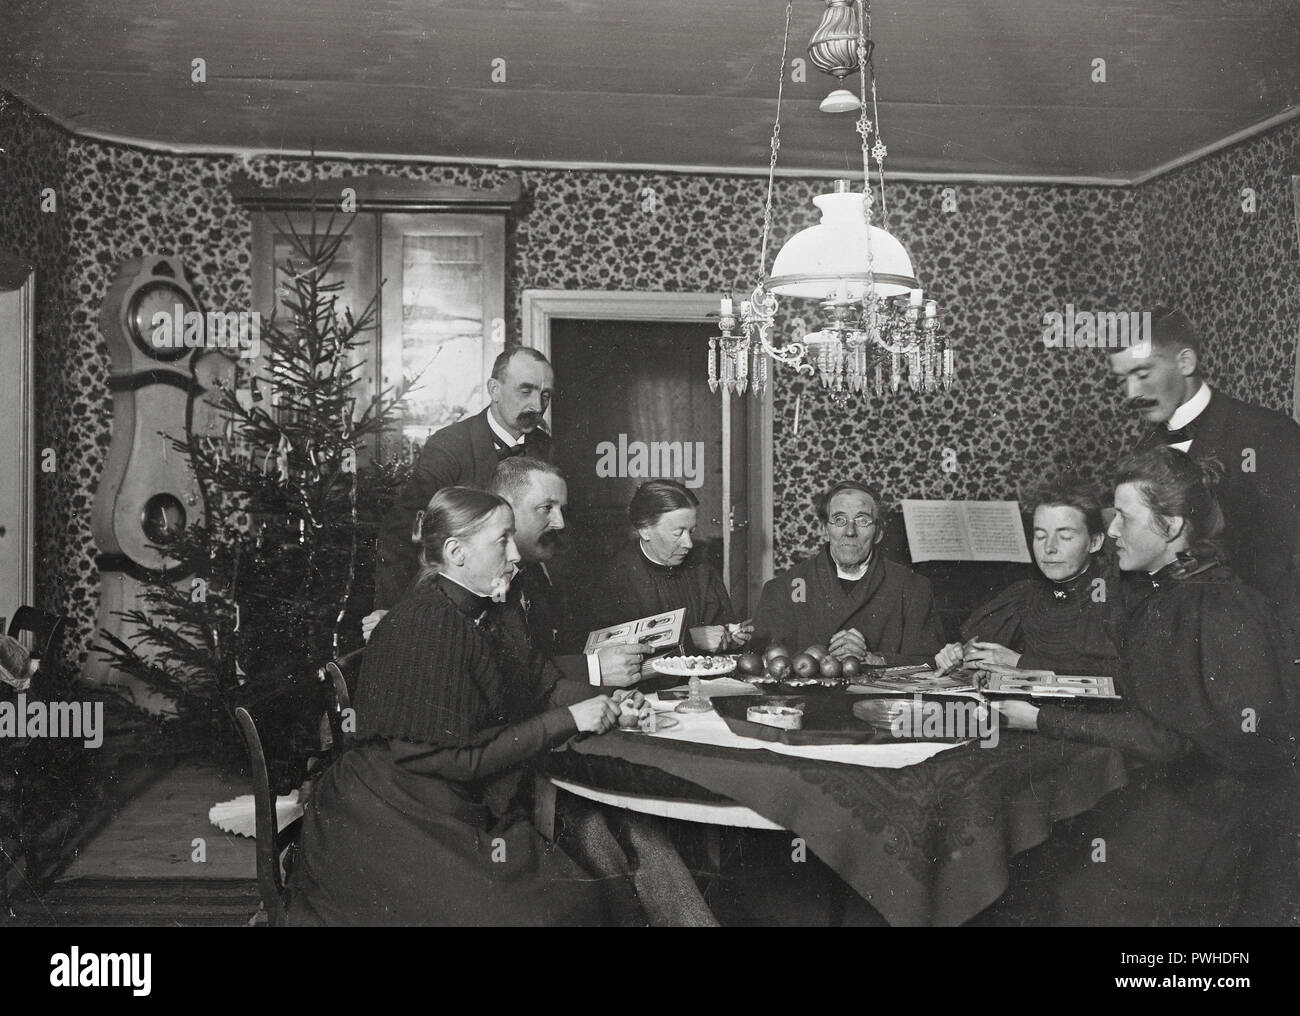 Christmas at the turn of the century 1800-1900. A priest has a central place at the table where the family is sitting. It's christmas holiday and they are enjoying the evening looking at cabinet photos of relatives and eating christmas apples. A christmas tree is standing in the corner. Sweden 1800s Ref 379A-13 Stock Photo